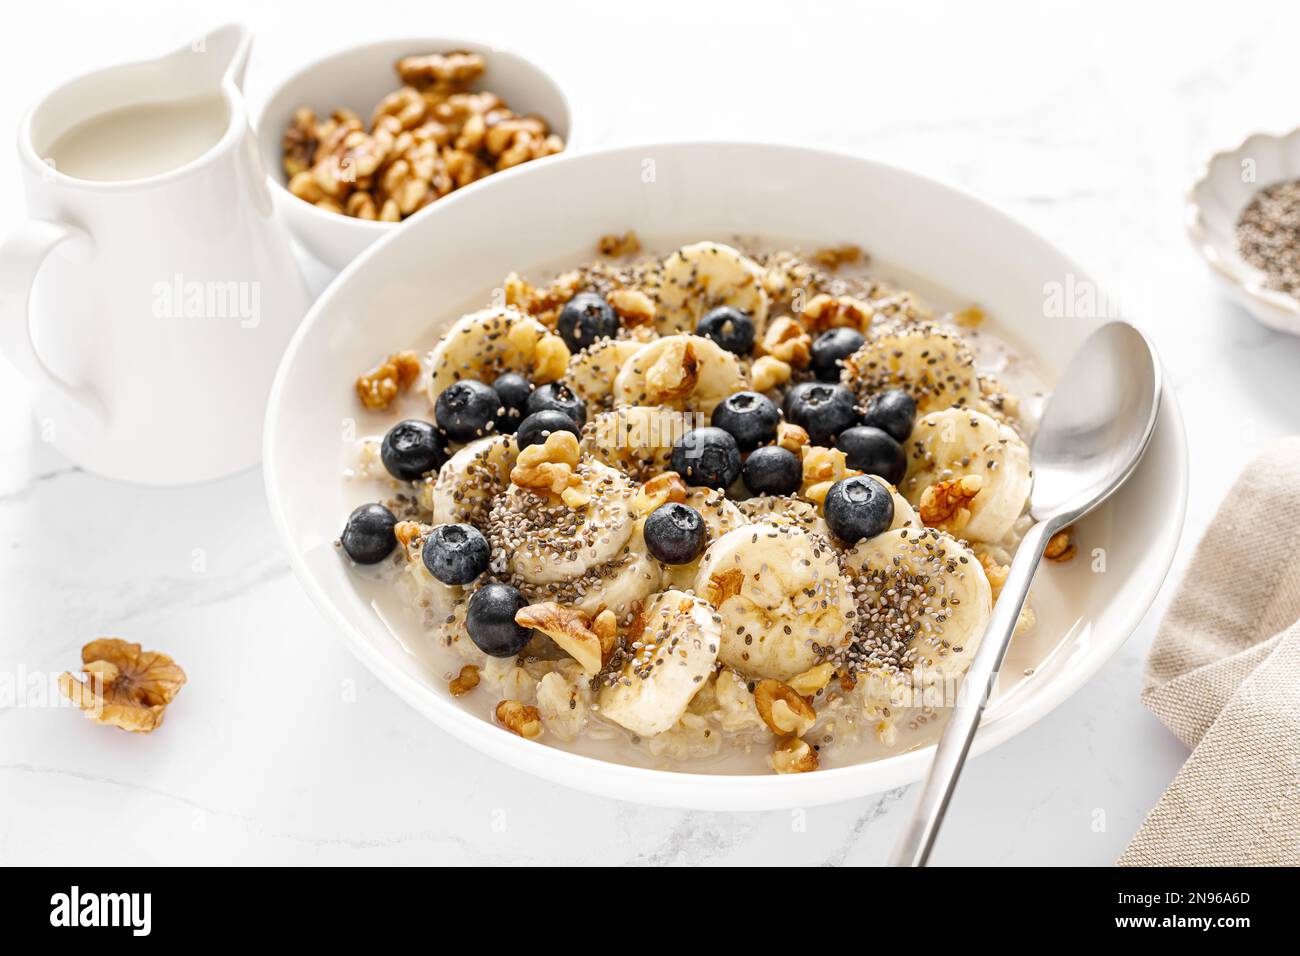 Oatmeal bowl. Oat porridge with banana, blueberry, walnut, chia seeds and oat milk for healthy breakfast. Healthy diet food Stock Photo